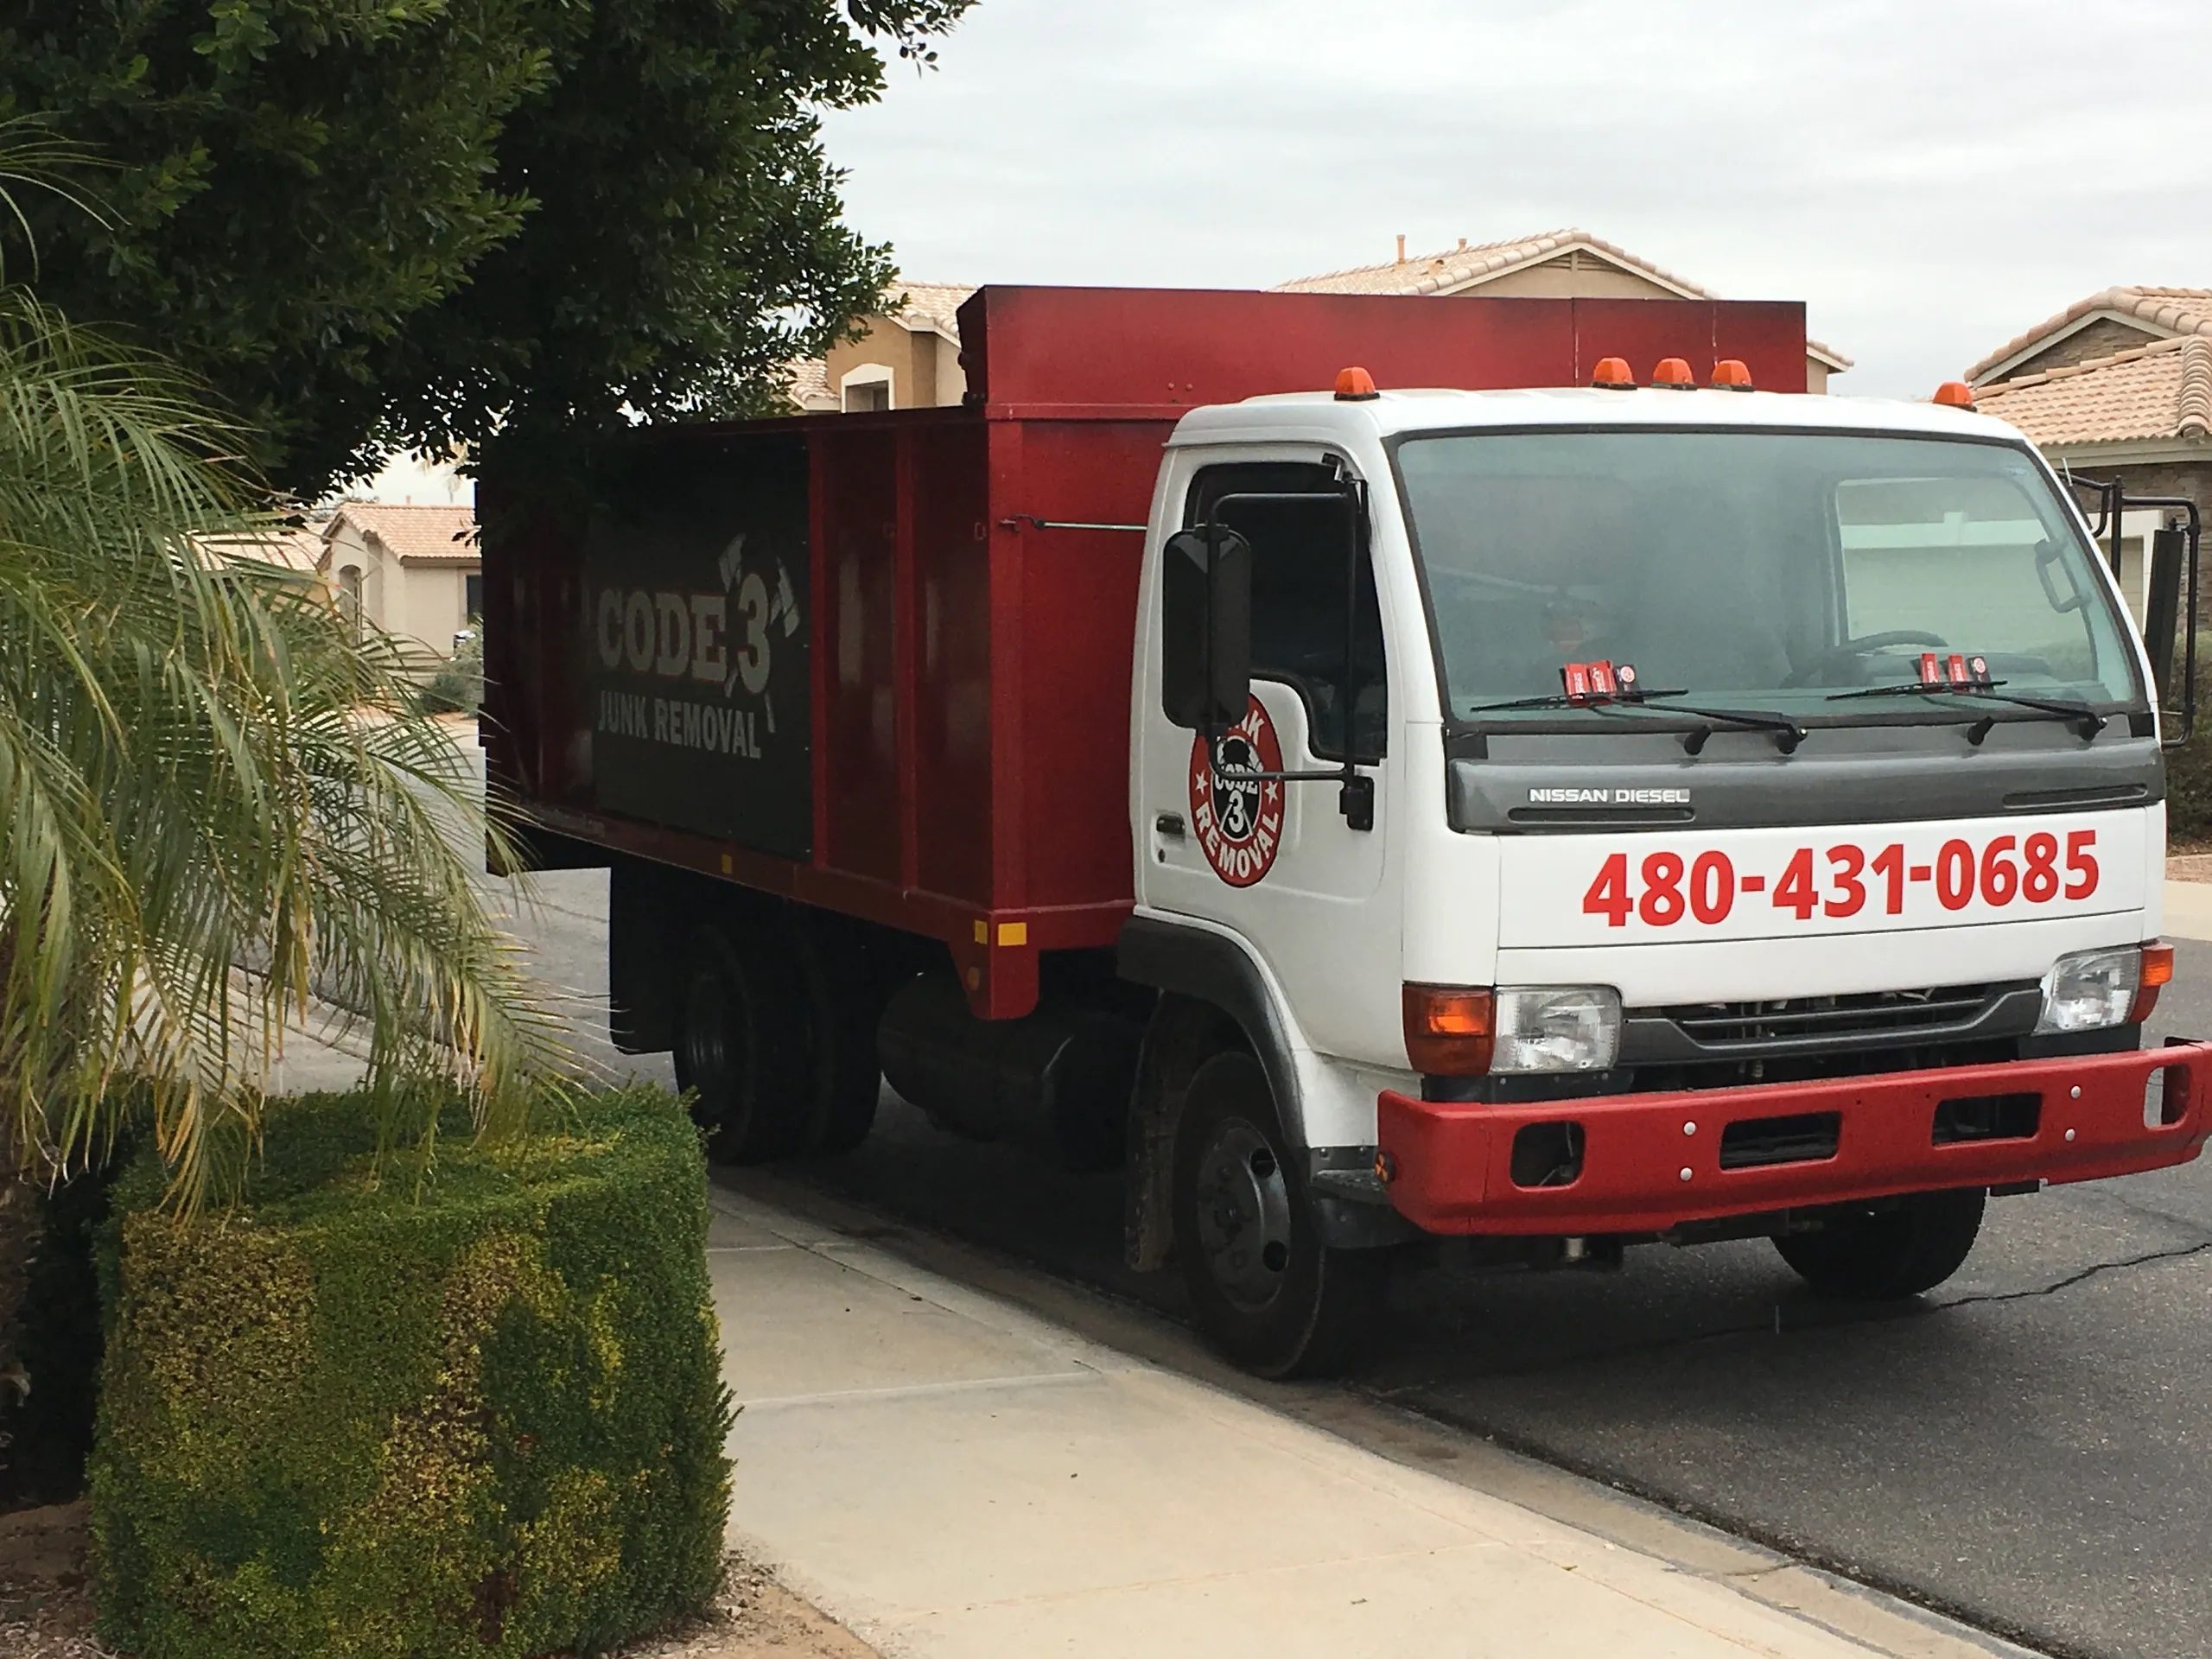 Code 3 Junk Removal Truck 3